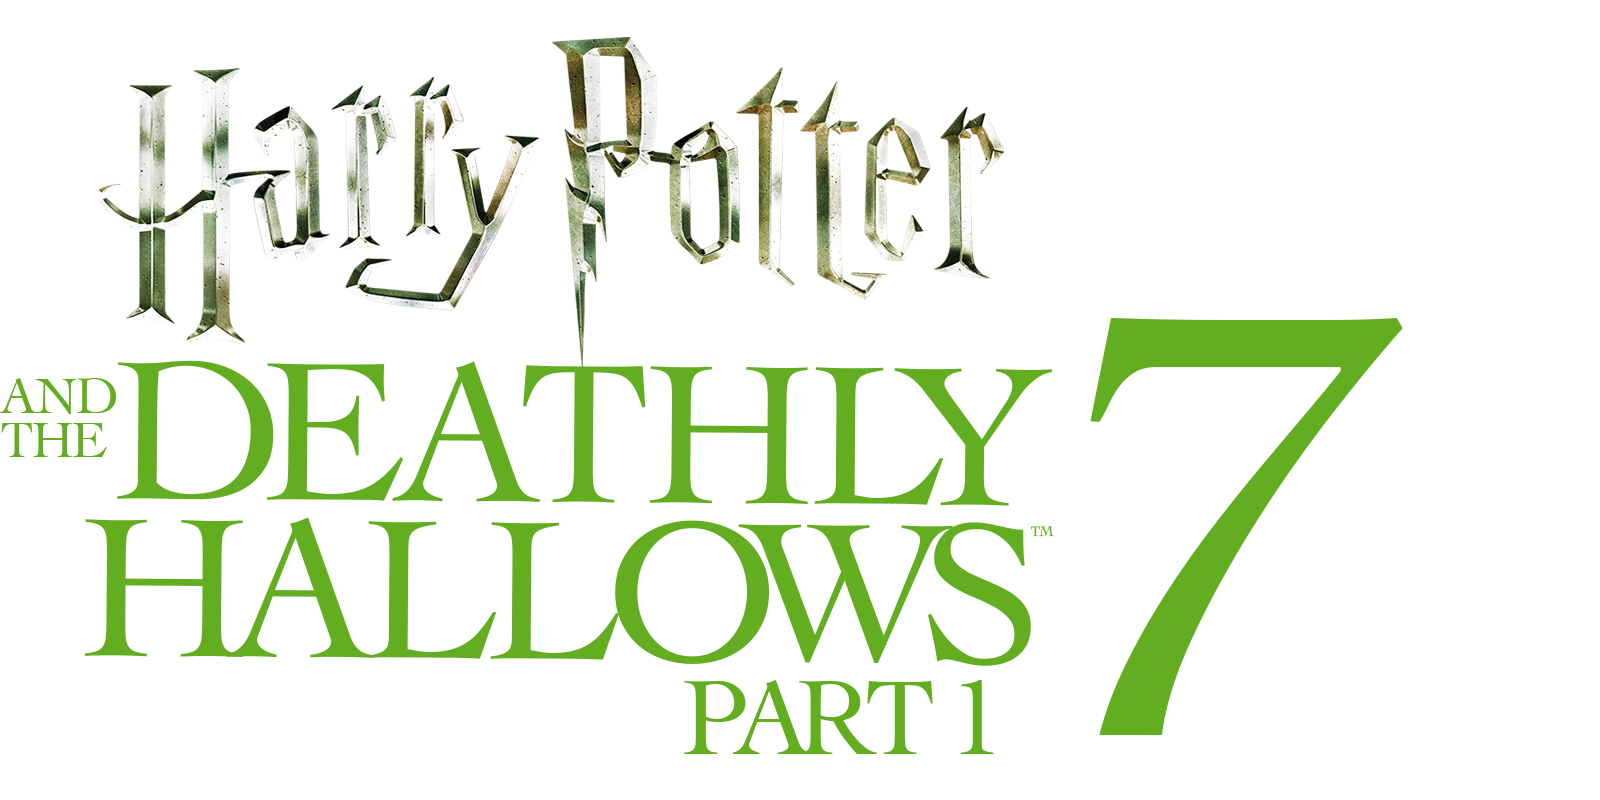 harry potter and the deathly hallows: part 1 full movie